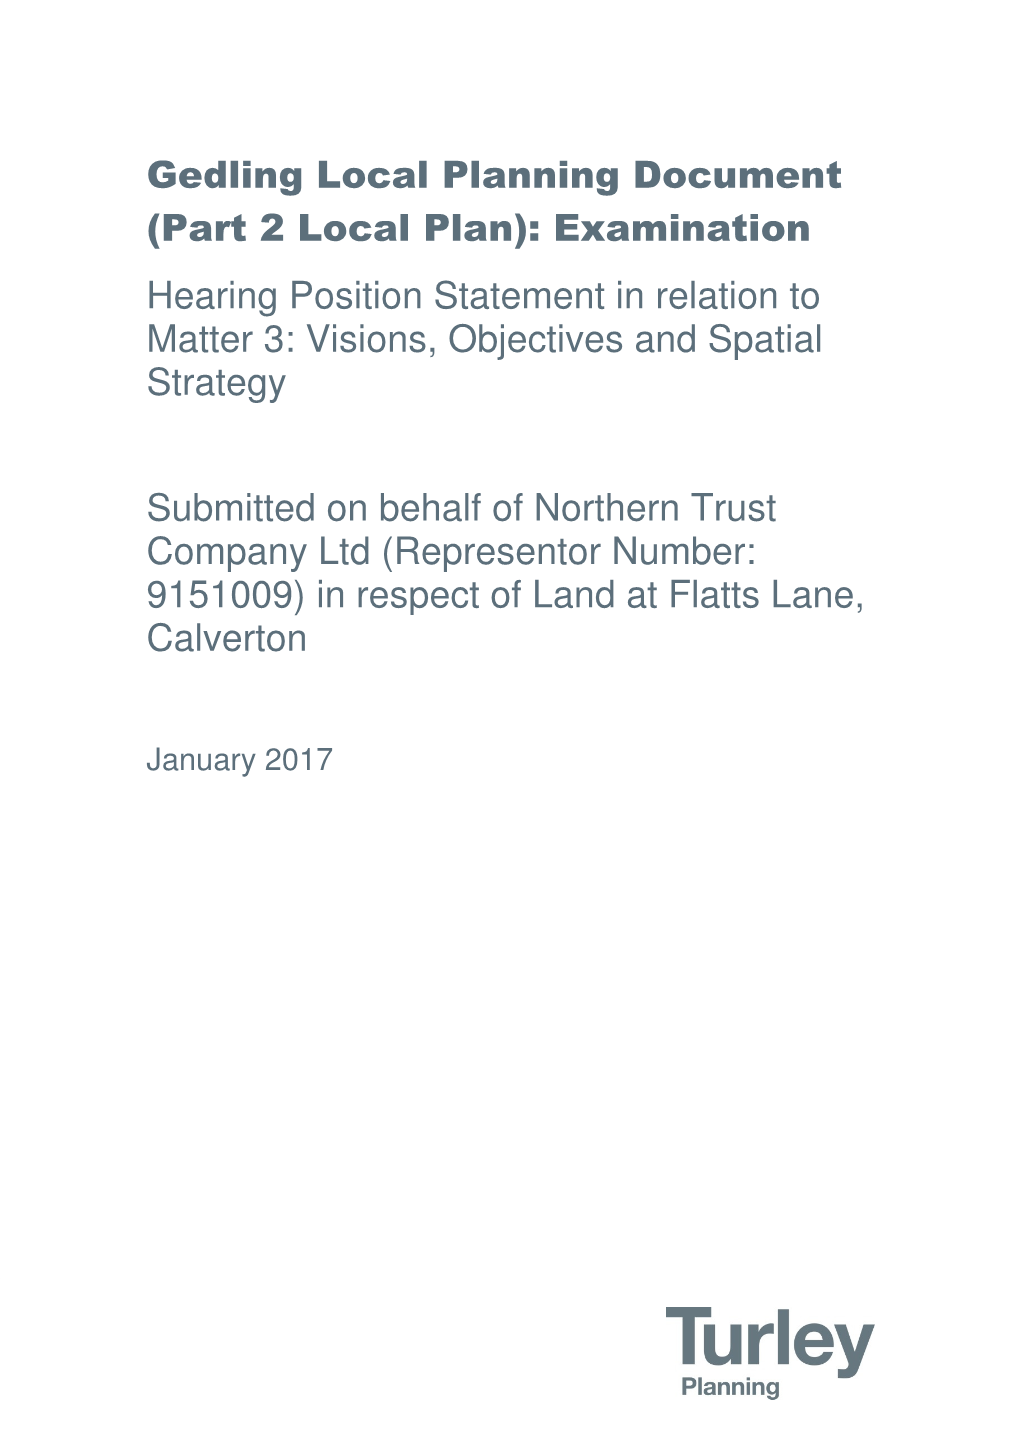 Gedling Local Planning Document (Part 2 Local Plan): Examination Hearing Position Statement in Relation to Matter 3: Visions, Objectives and Spatial Strategy